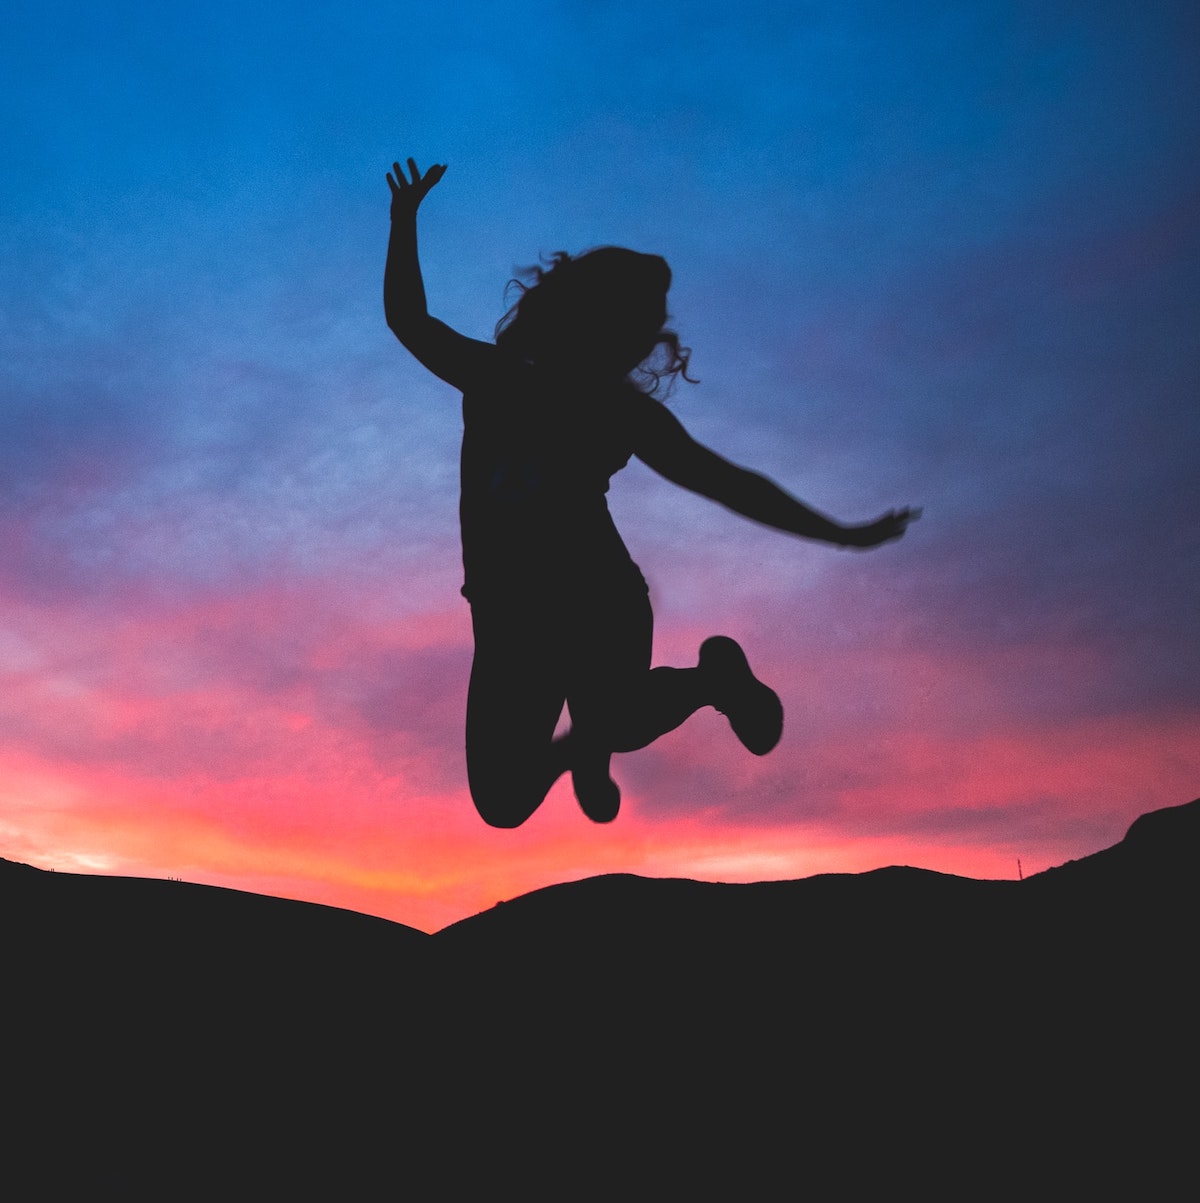 Silhouette of a person jumping in front of a sunset and mountains.